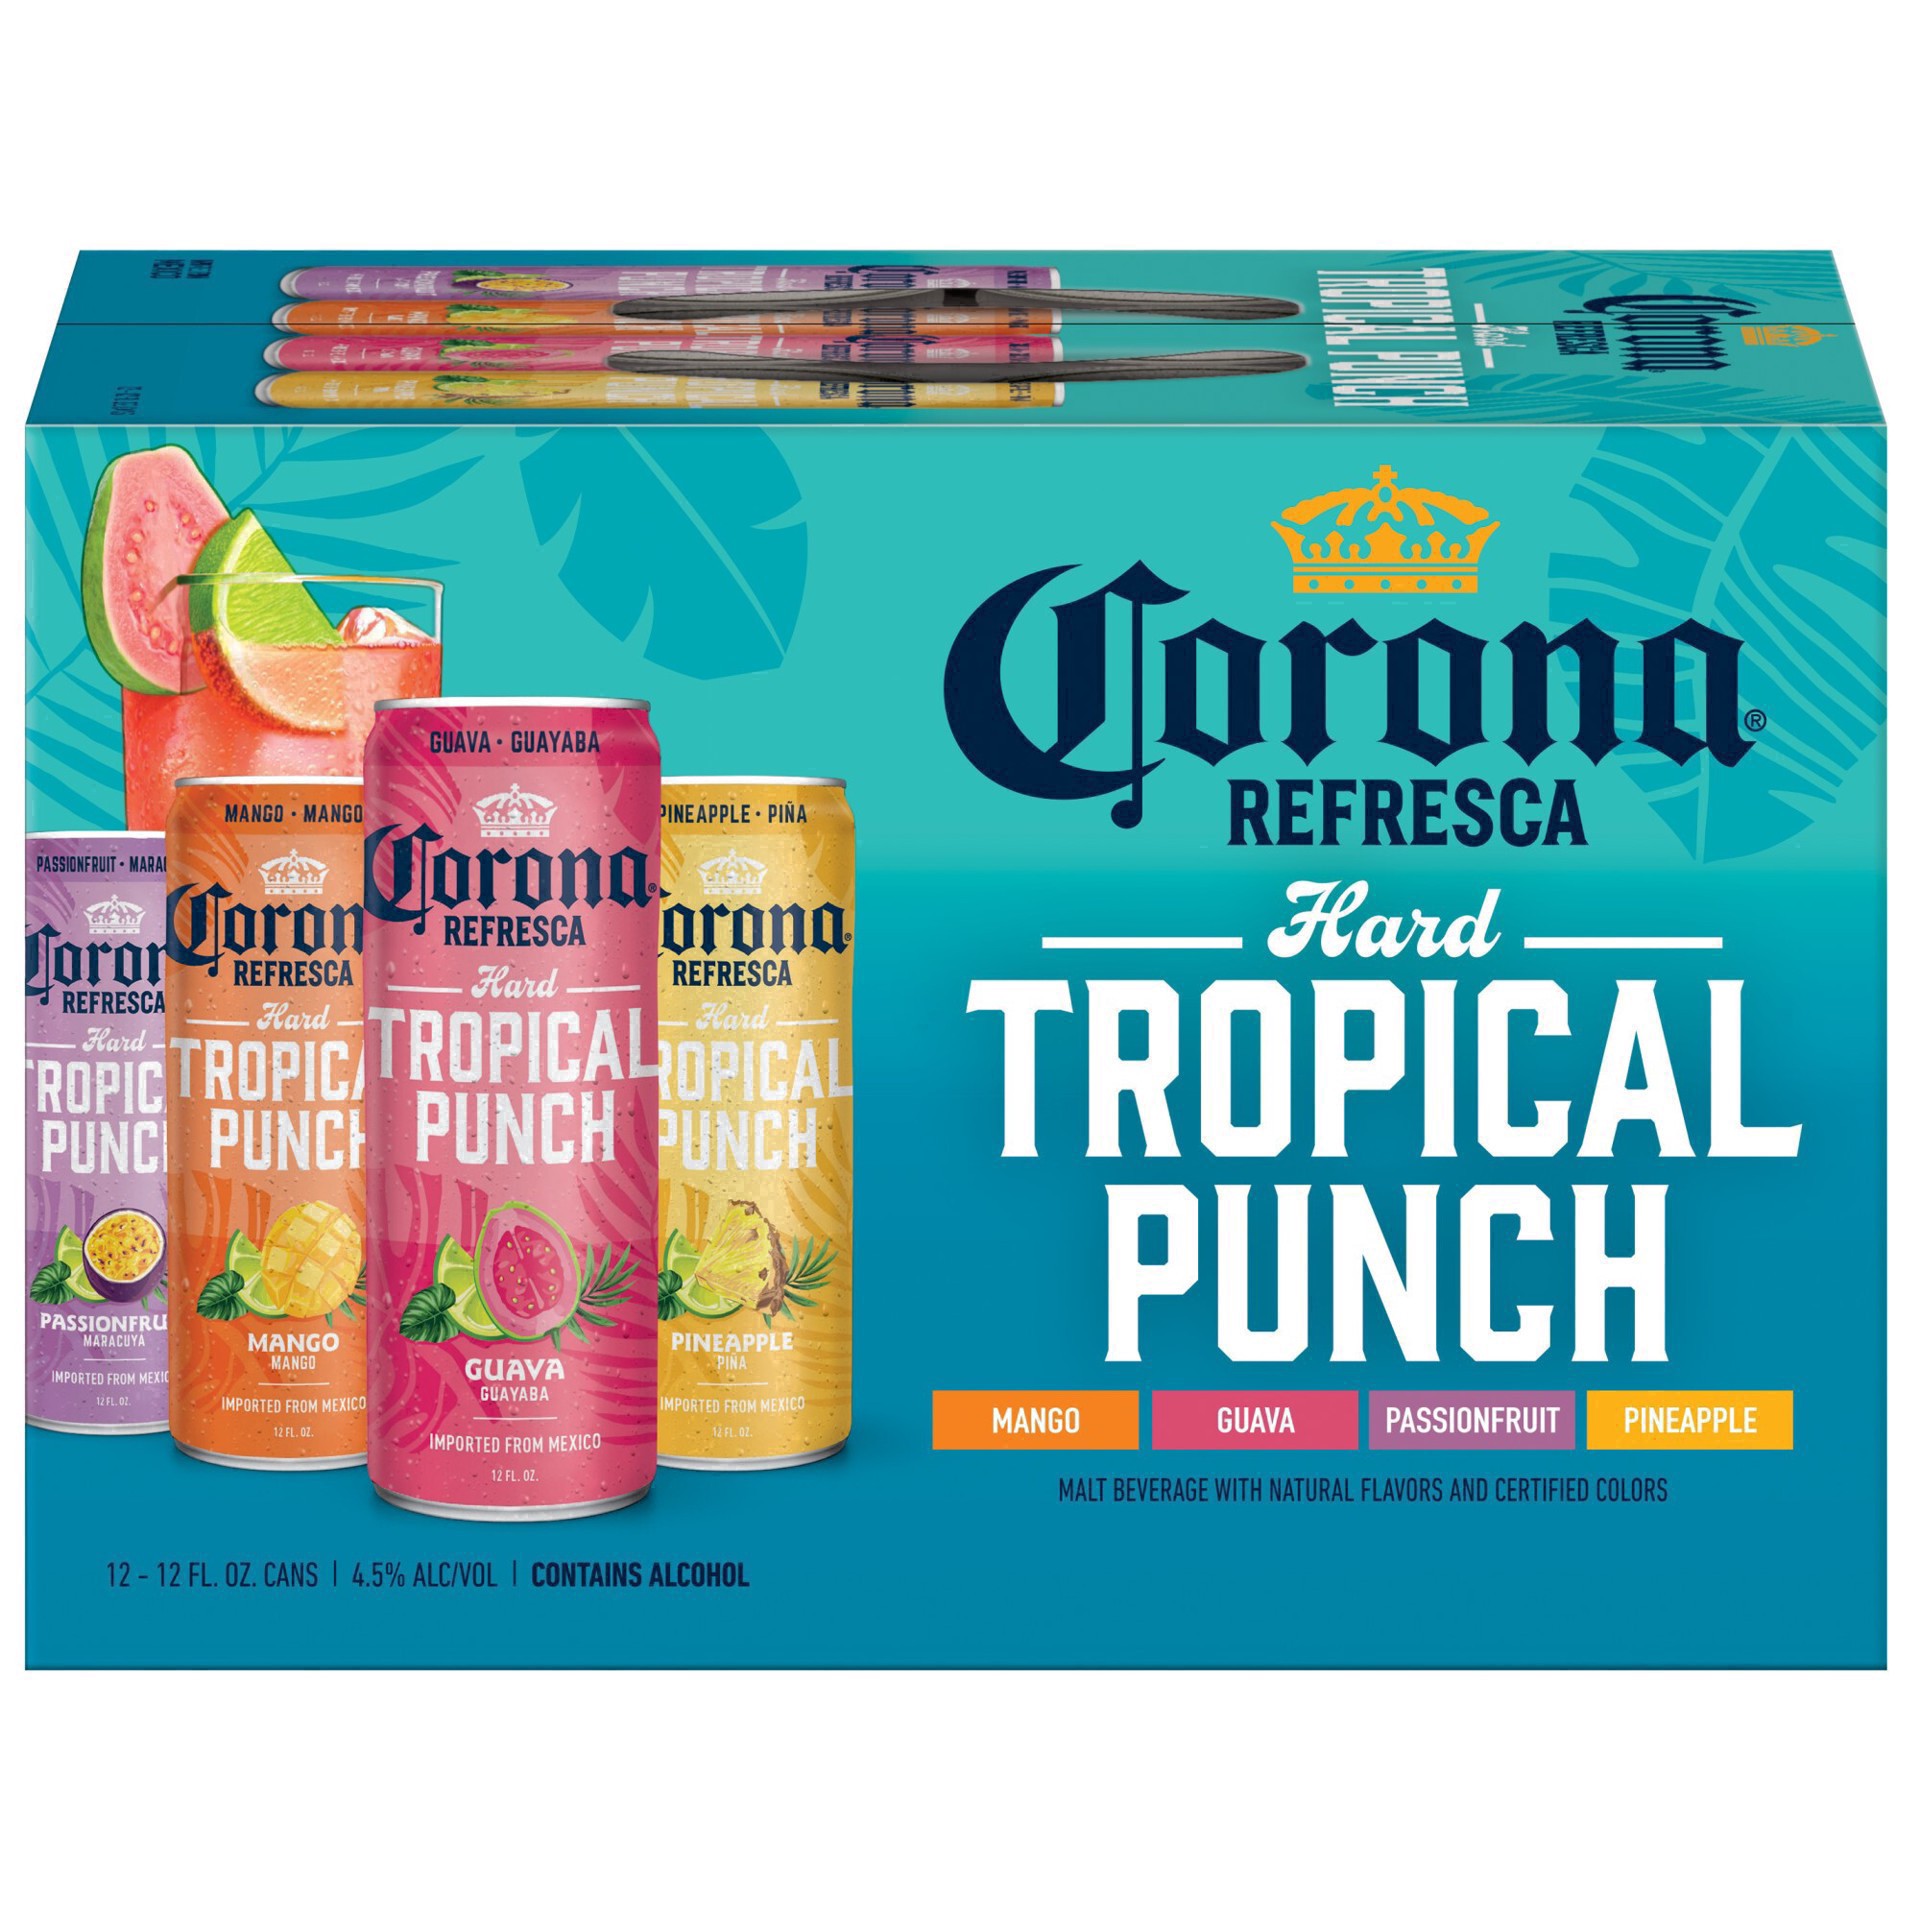 slide 105 of 113, Corona Refresca Hard Tropical Punch Variety Pack Cans, 144 fl oz